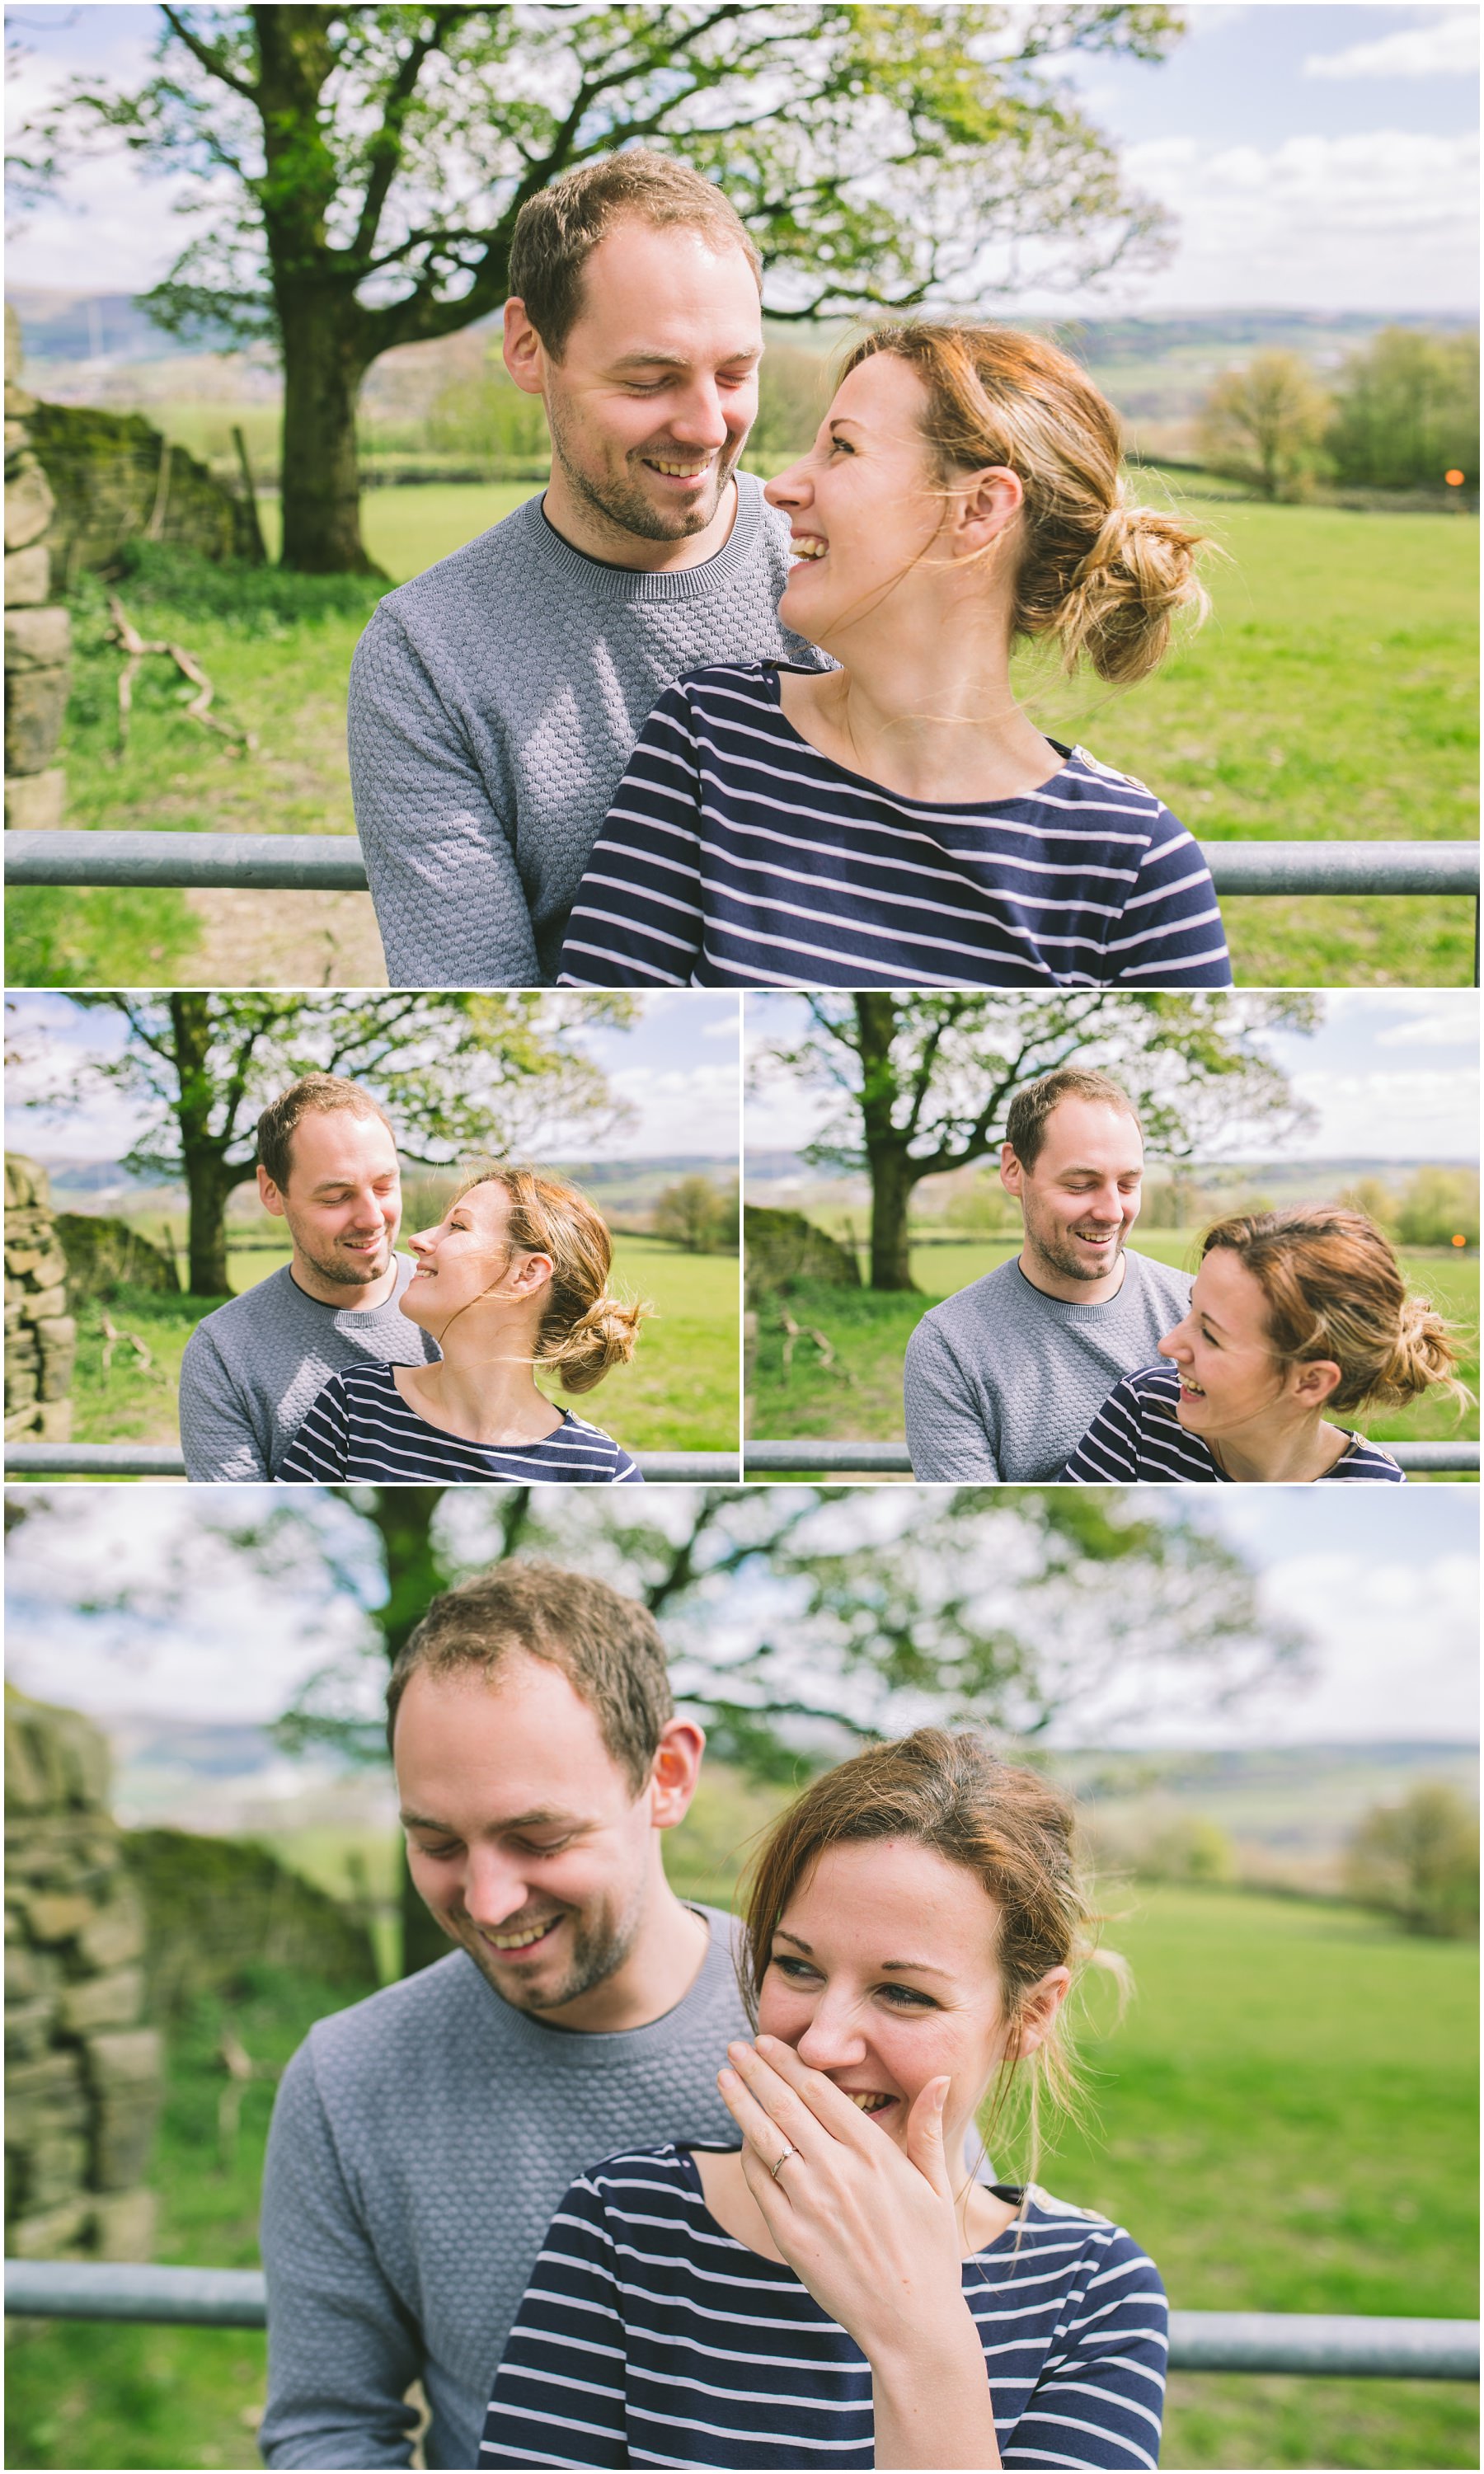 Danny and Lauren laughing on their ramsbottom engagement shoot